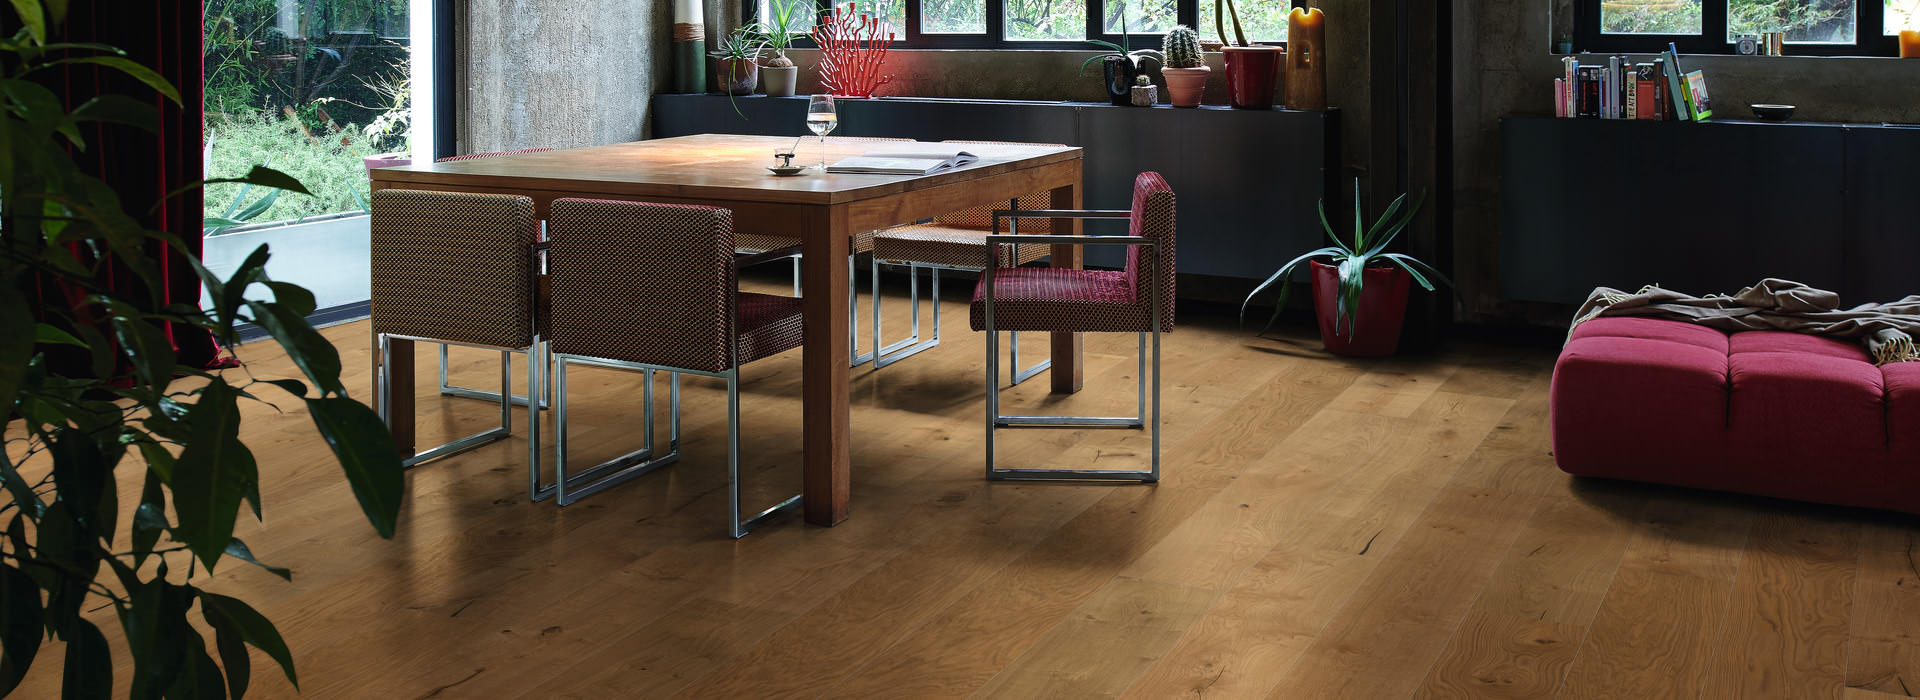 HARO PARQUET 4000 Plank 1-Strip Plaza 240 4V Oak Sauvage brushed naturaLin plus Top Connect